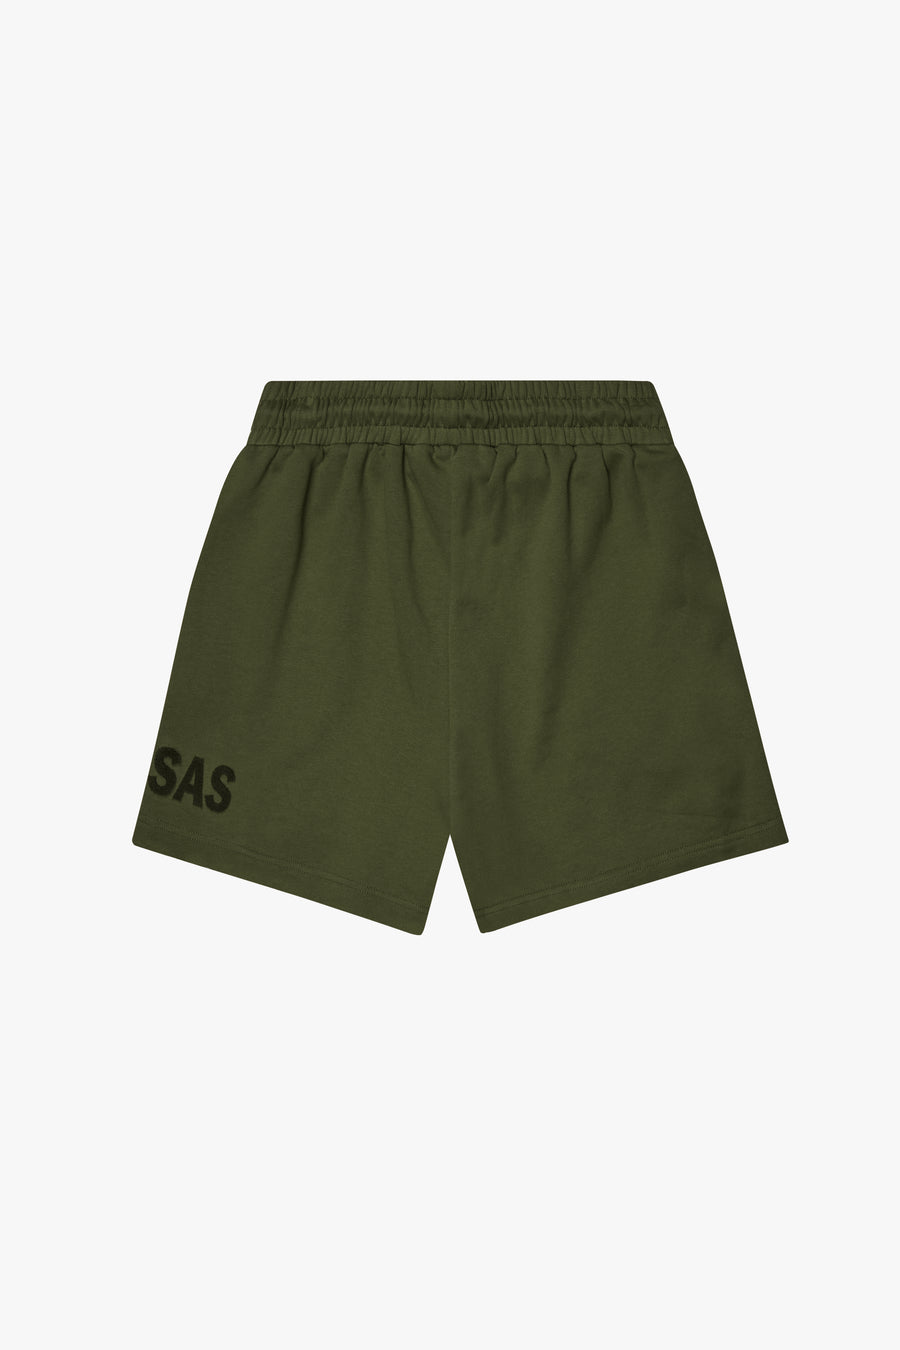 "BLOOM" VINTAGE GREEN WOVEN SHORTS